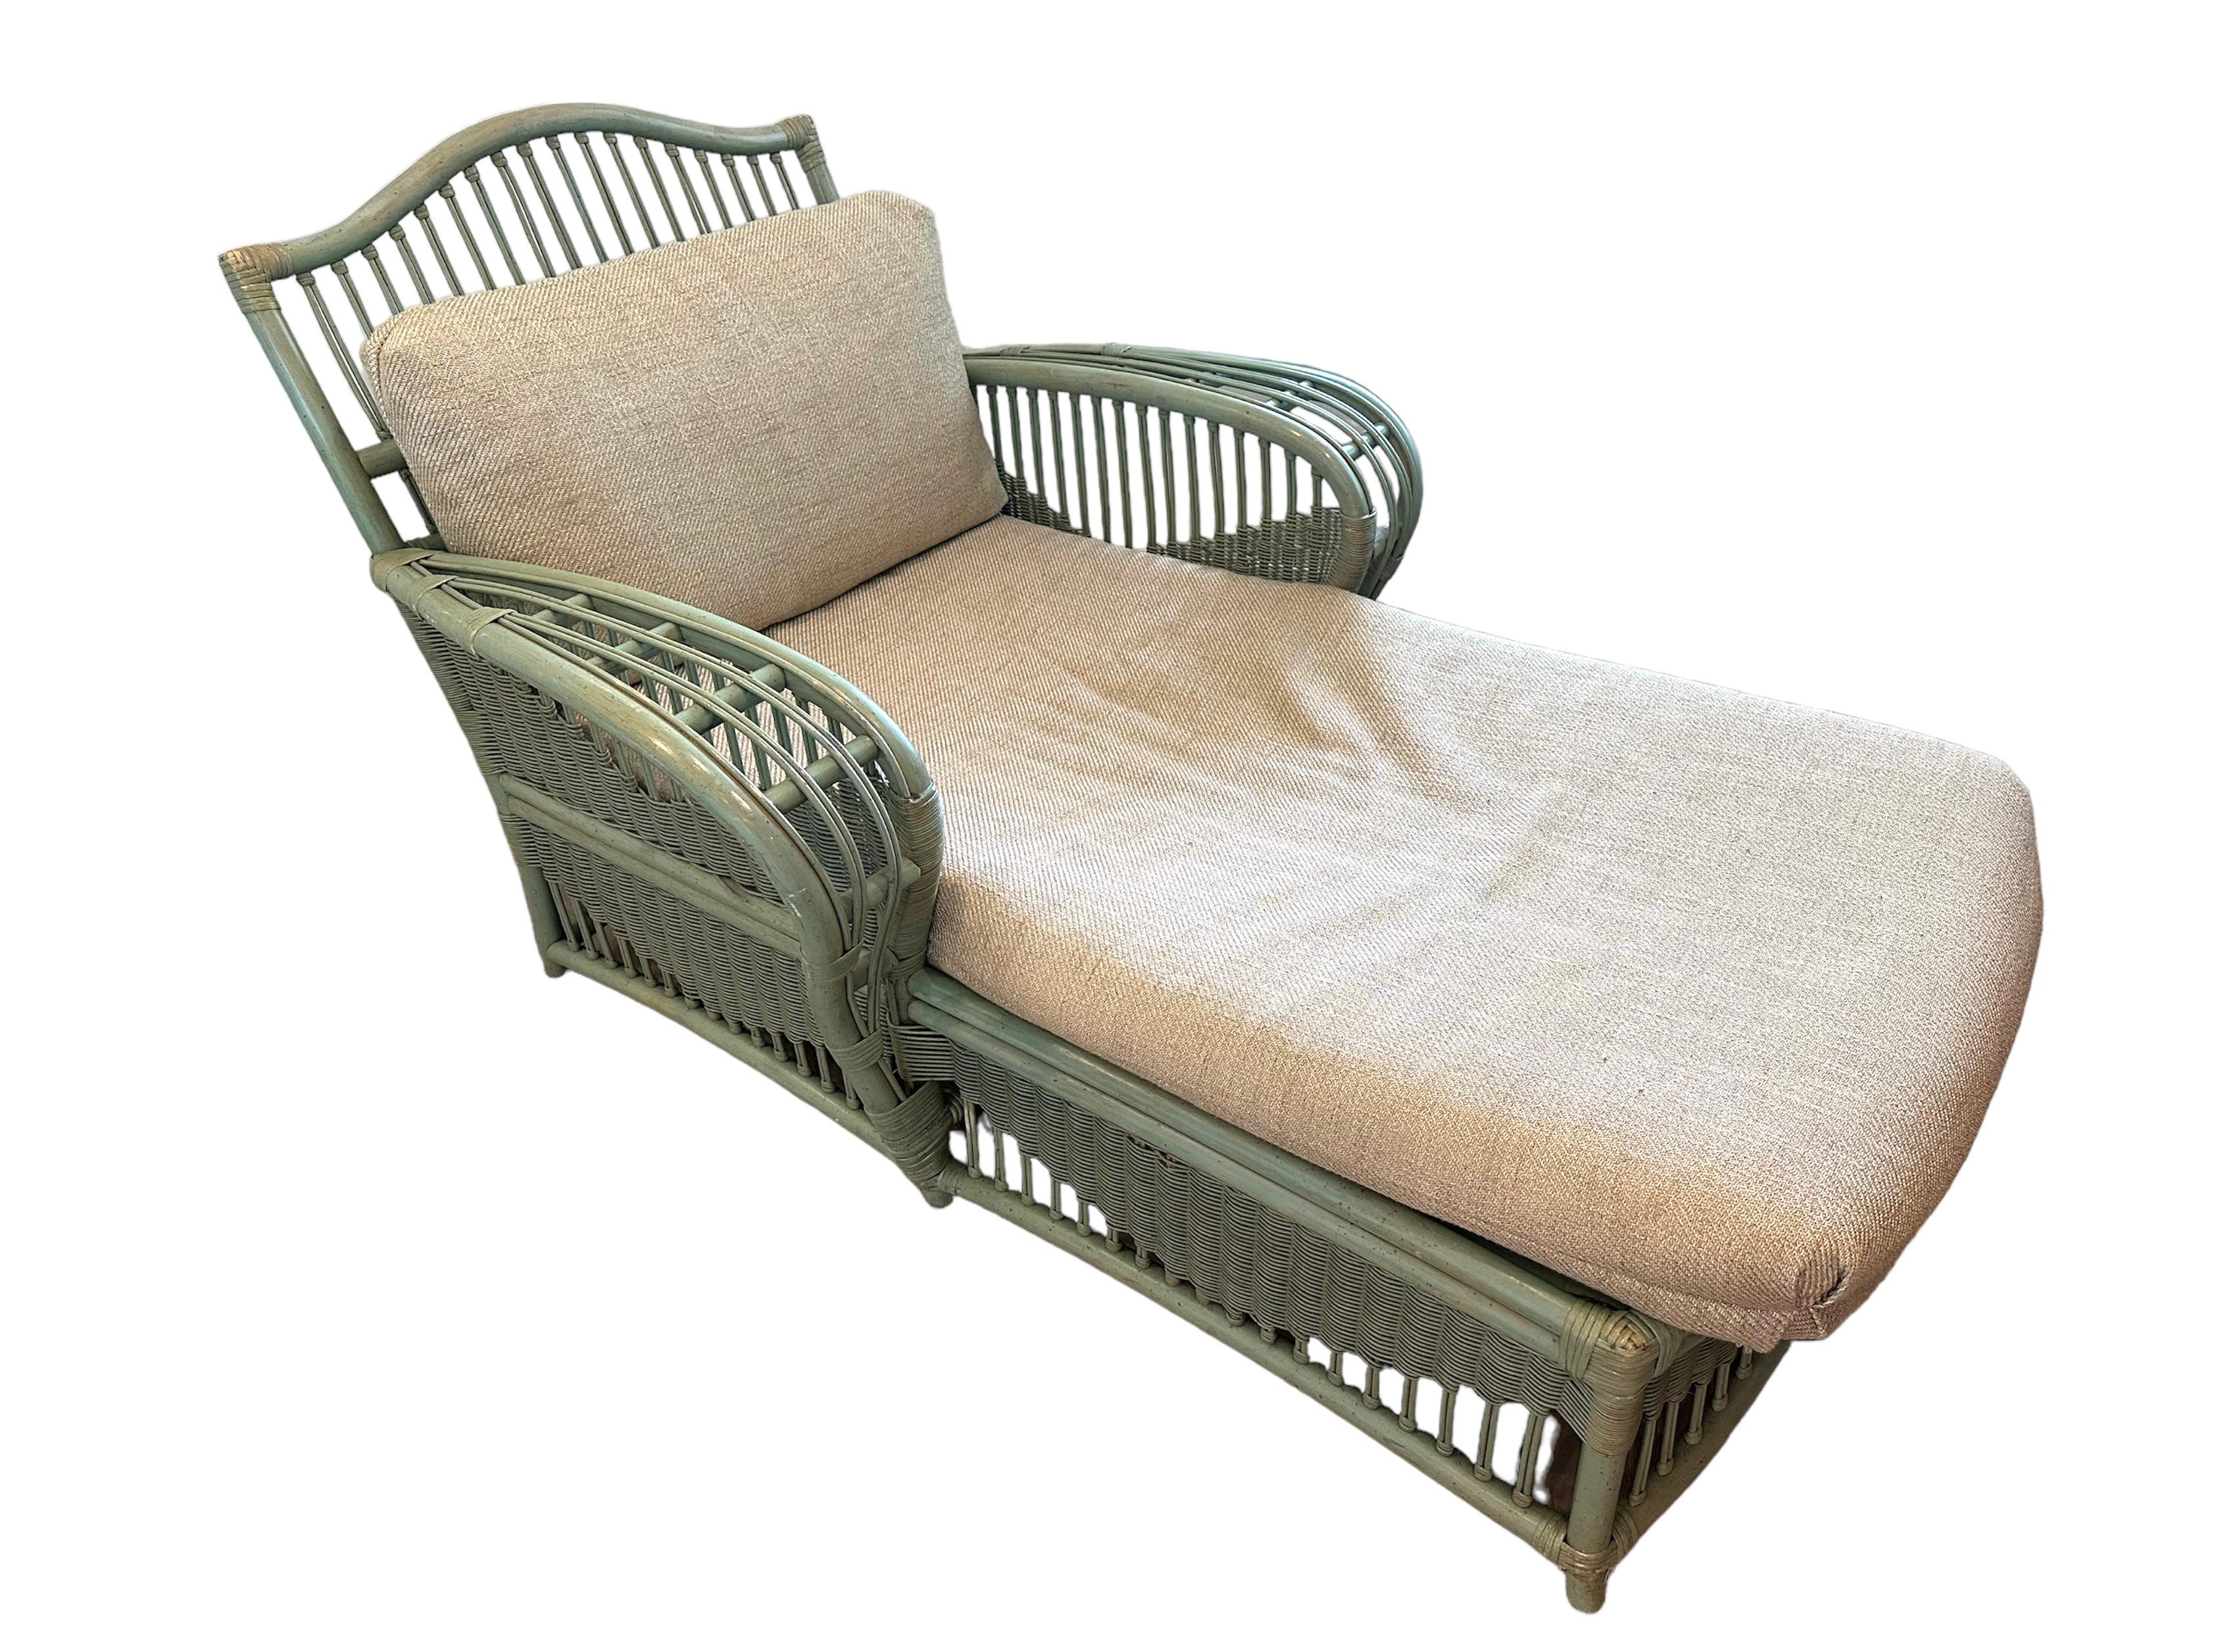 Read notes:
A newly upholstered Ficks  Reed vintage rattan chaise with original pillow but reupholstered, they are very comfortable. Beautiful lines and comfort, some wear to paint. A classic celadon green.

The colorful striped pillow “is not